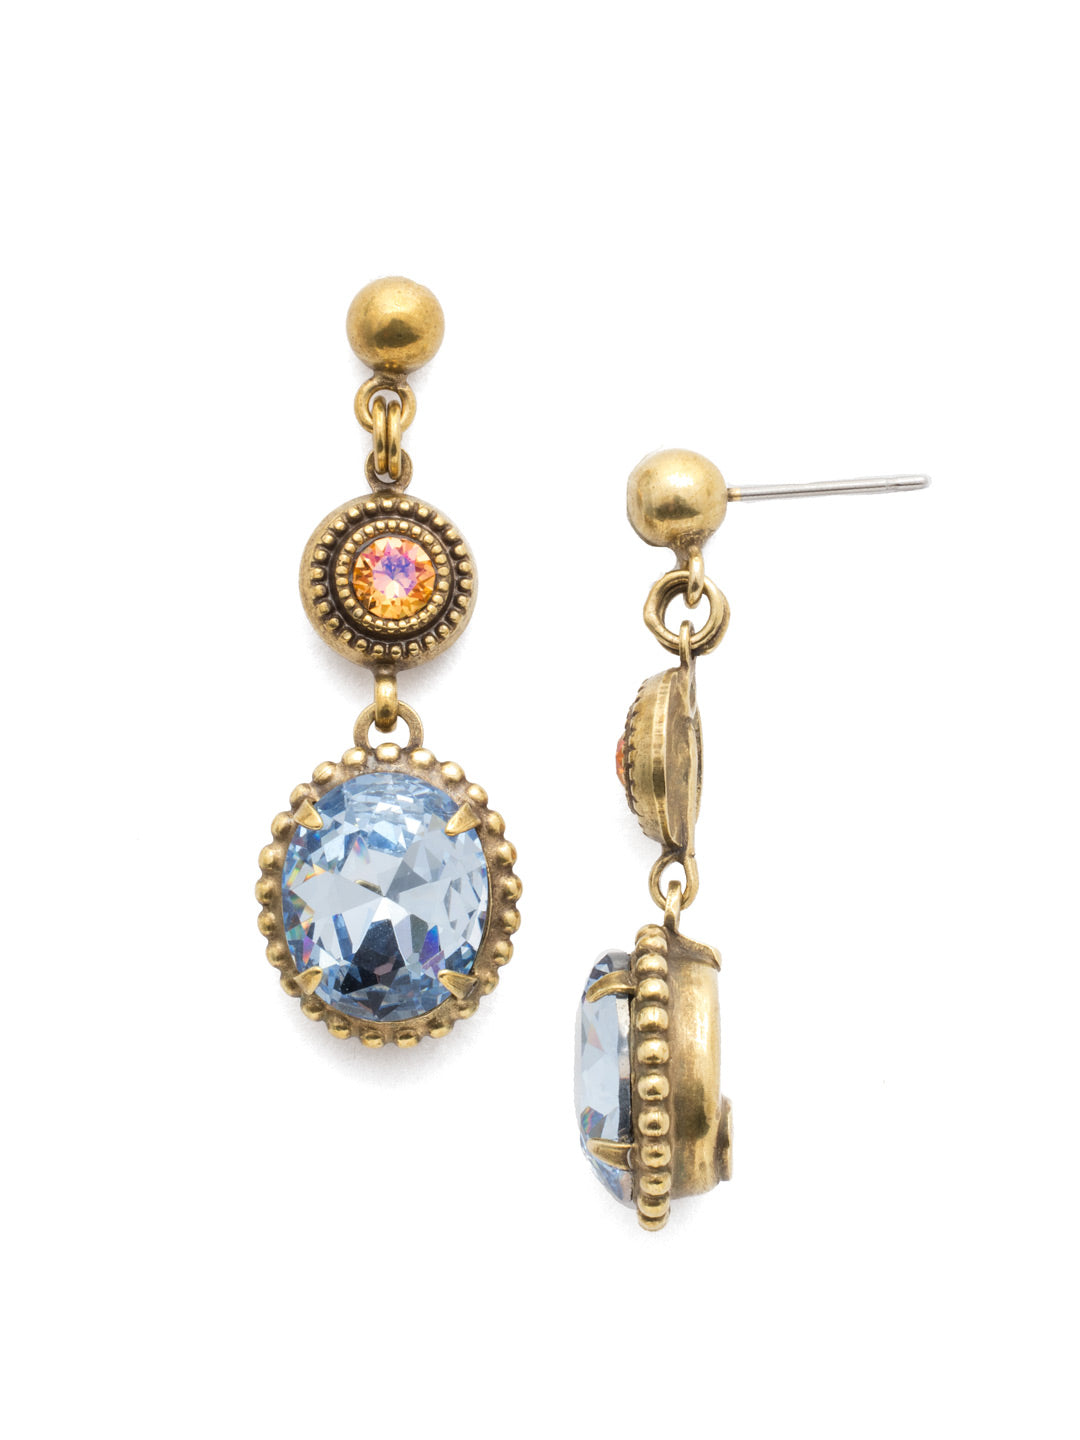 Ortensia Post Drop Earring - EEA34AGBHB - Featuring perfectly placed crystals, these elegant earrings are the perfect touch of sparkle to your outfit, fit for any occasion!